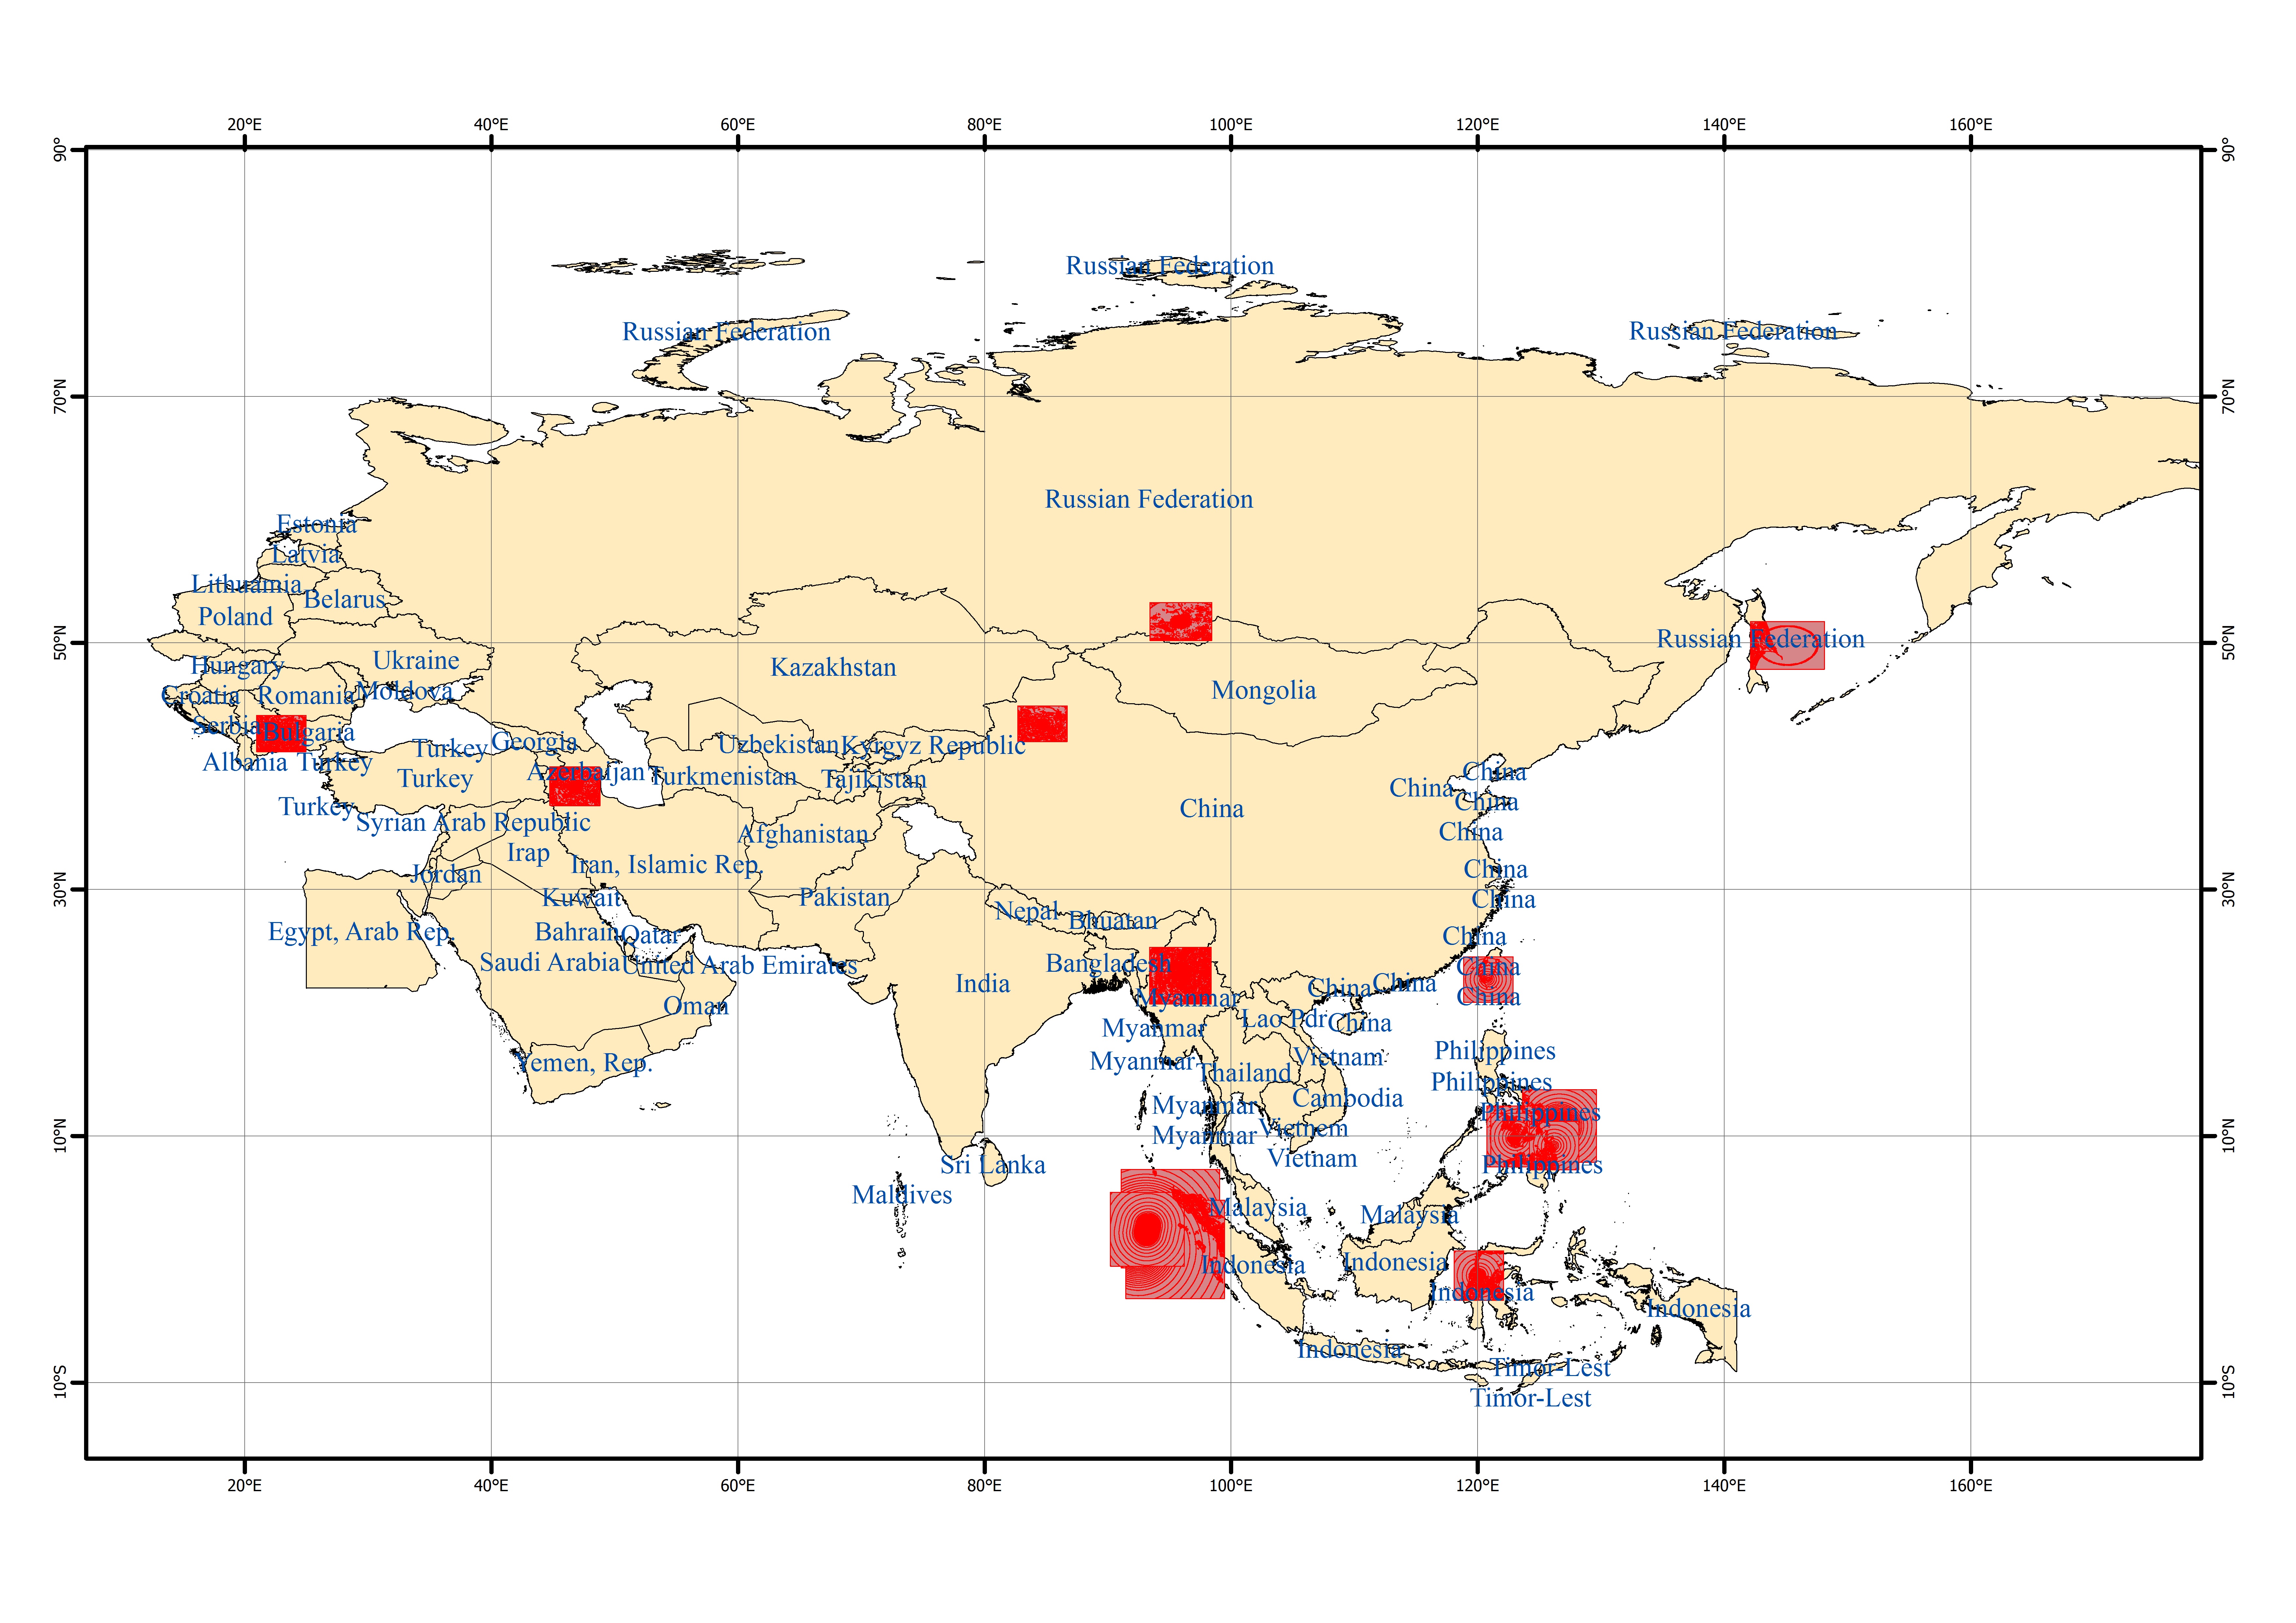 Spatio-temporal Distribution of Earthquake Disaster in the Belt and Road Area of 2012